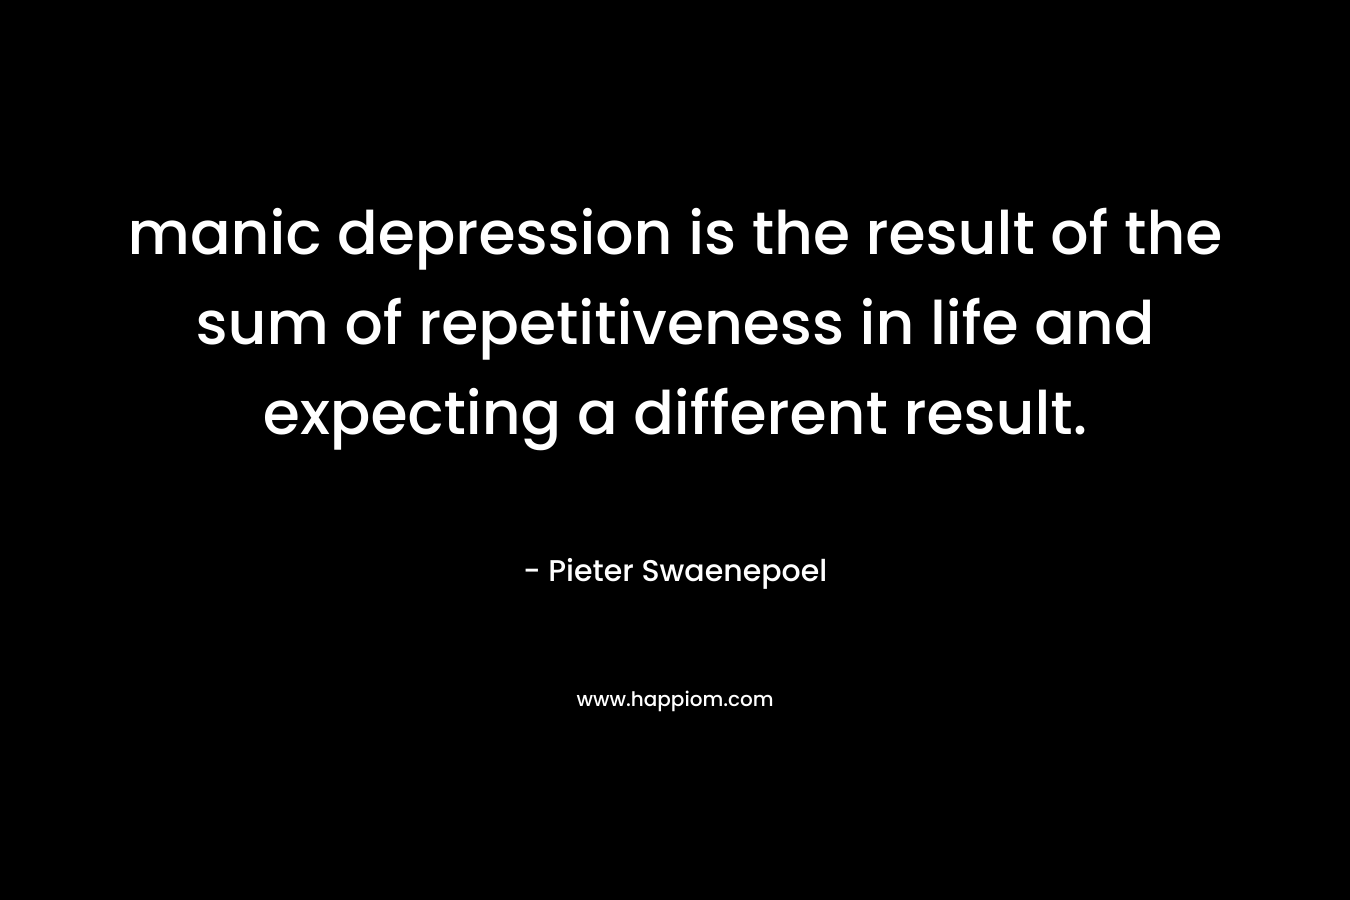 manic depression is the result of the sum of repetitiveness in life and expecting a different result.